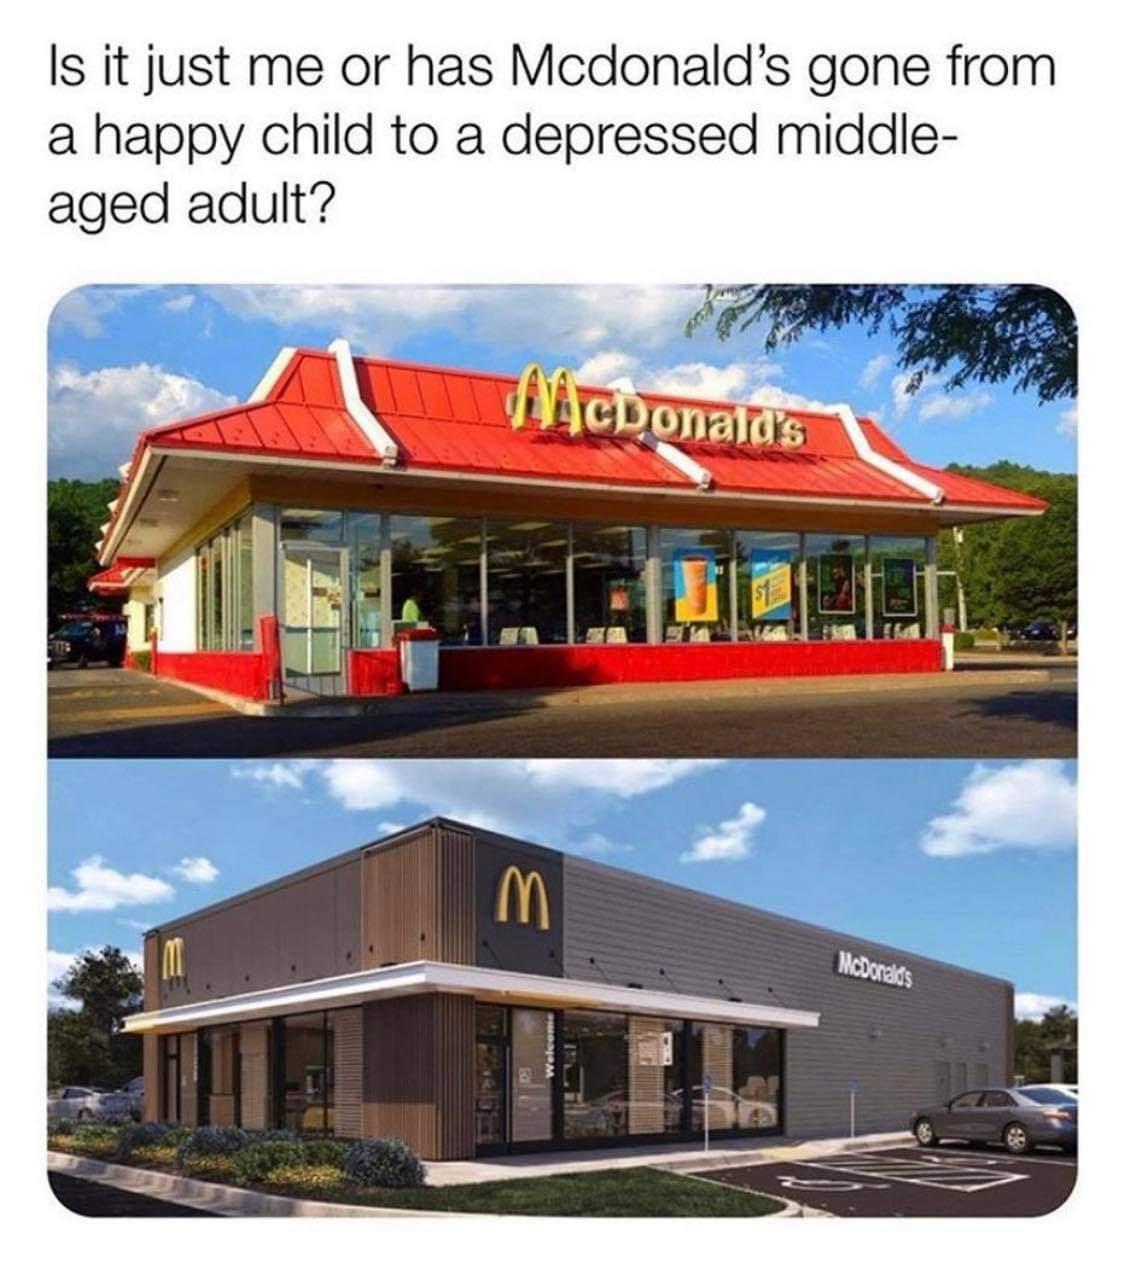 Is it just me or has Mcdonald's gone from a happy child to a depressed middle aged adult? MacDonald's m McDonalds